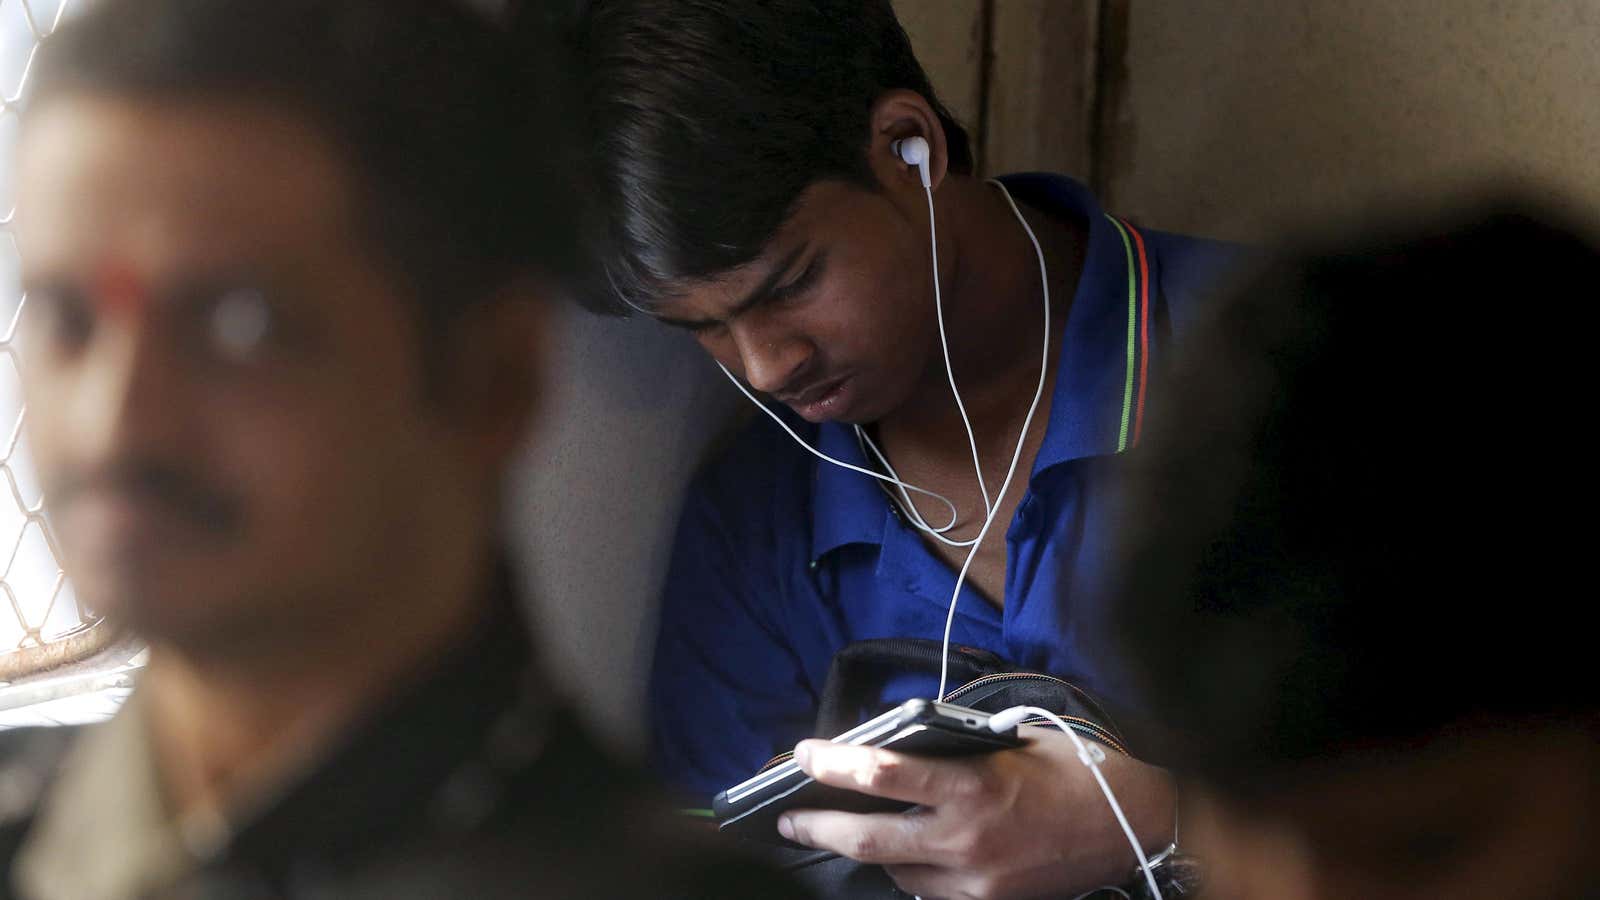 India is planning to tax winners in online gaming